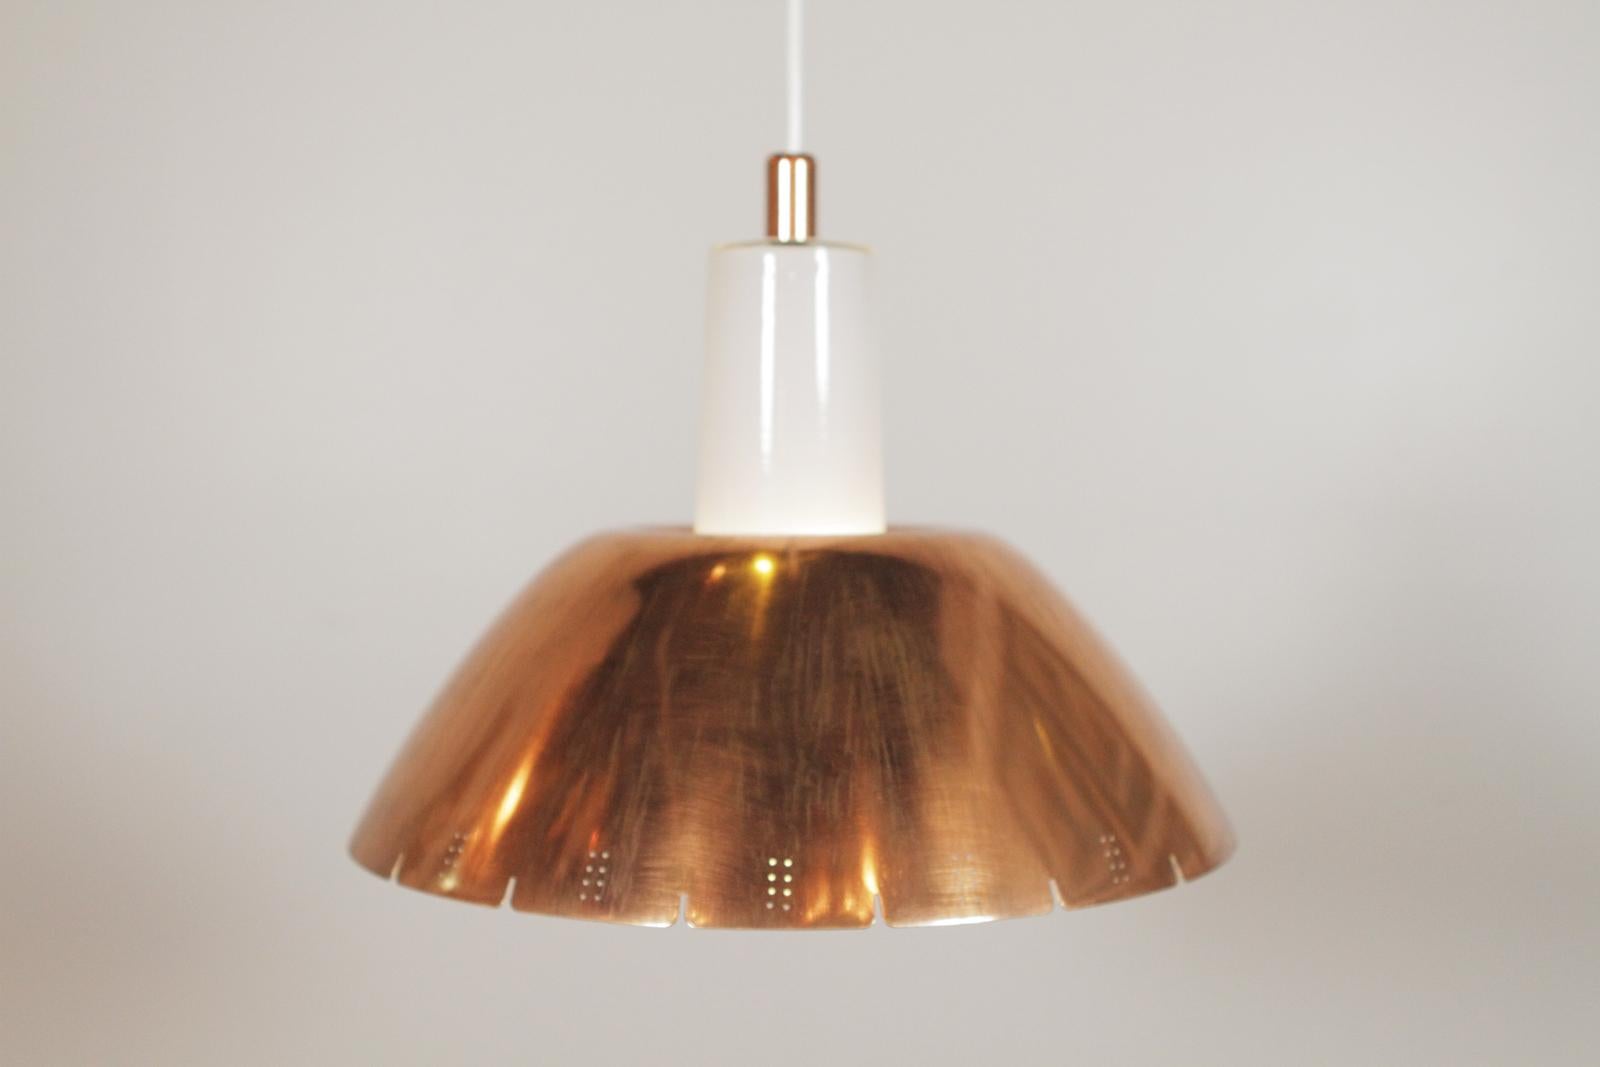 Midcentury chandelier by Paavo Tynell for Idman Oy mod.k2-20 Finland, 1954.
Dimensions: 14.25